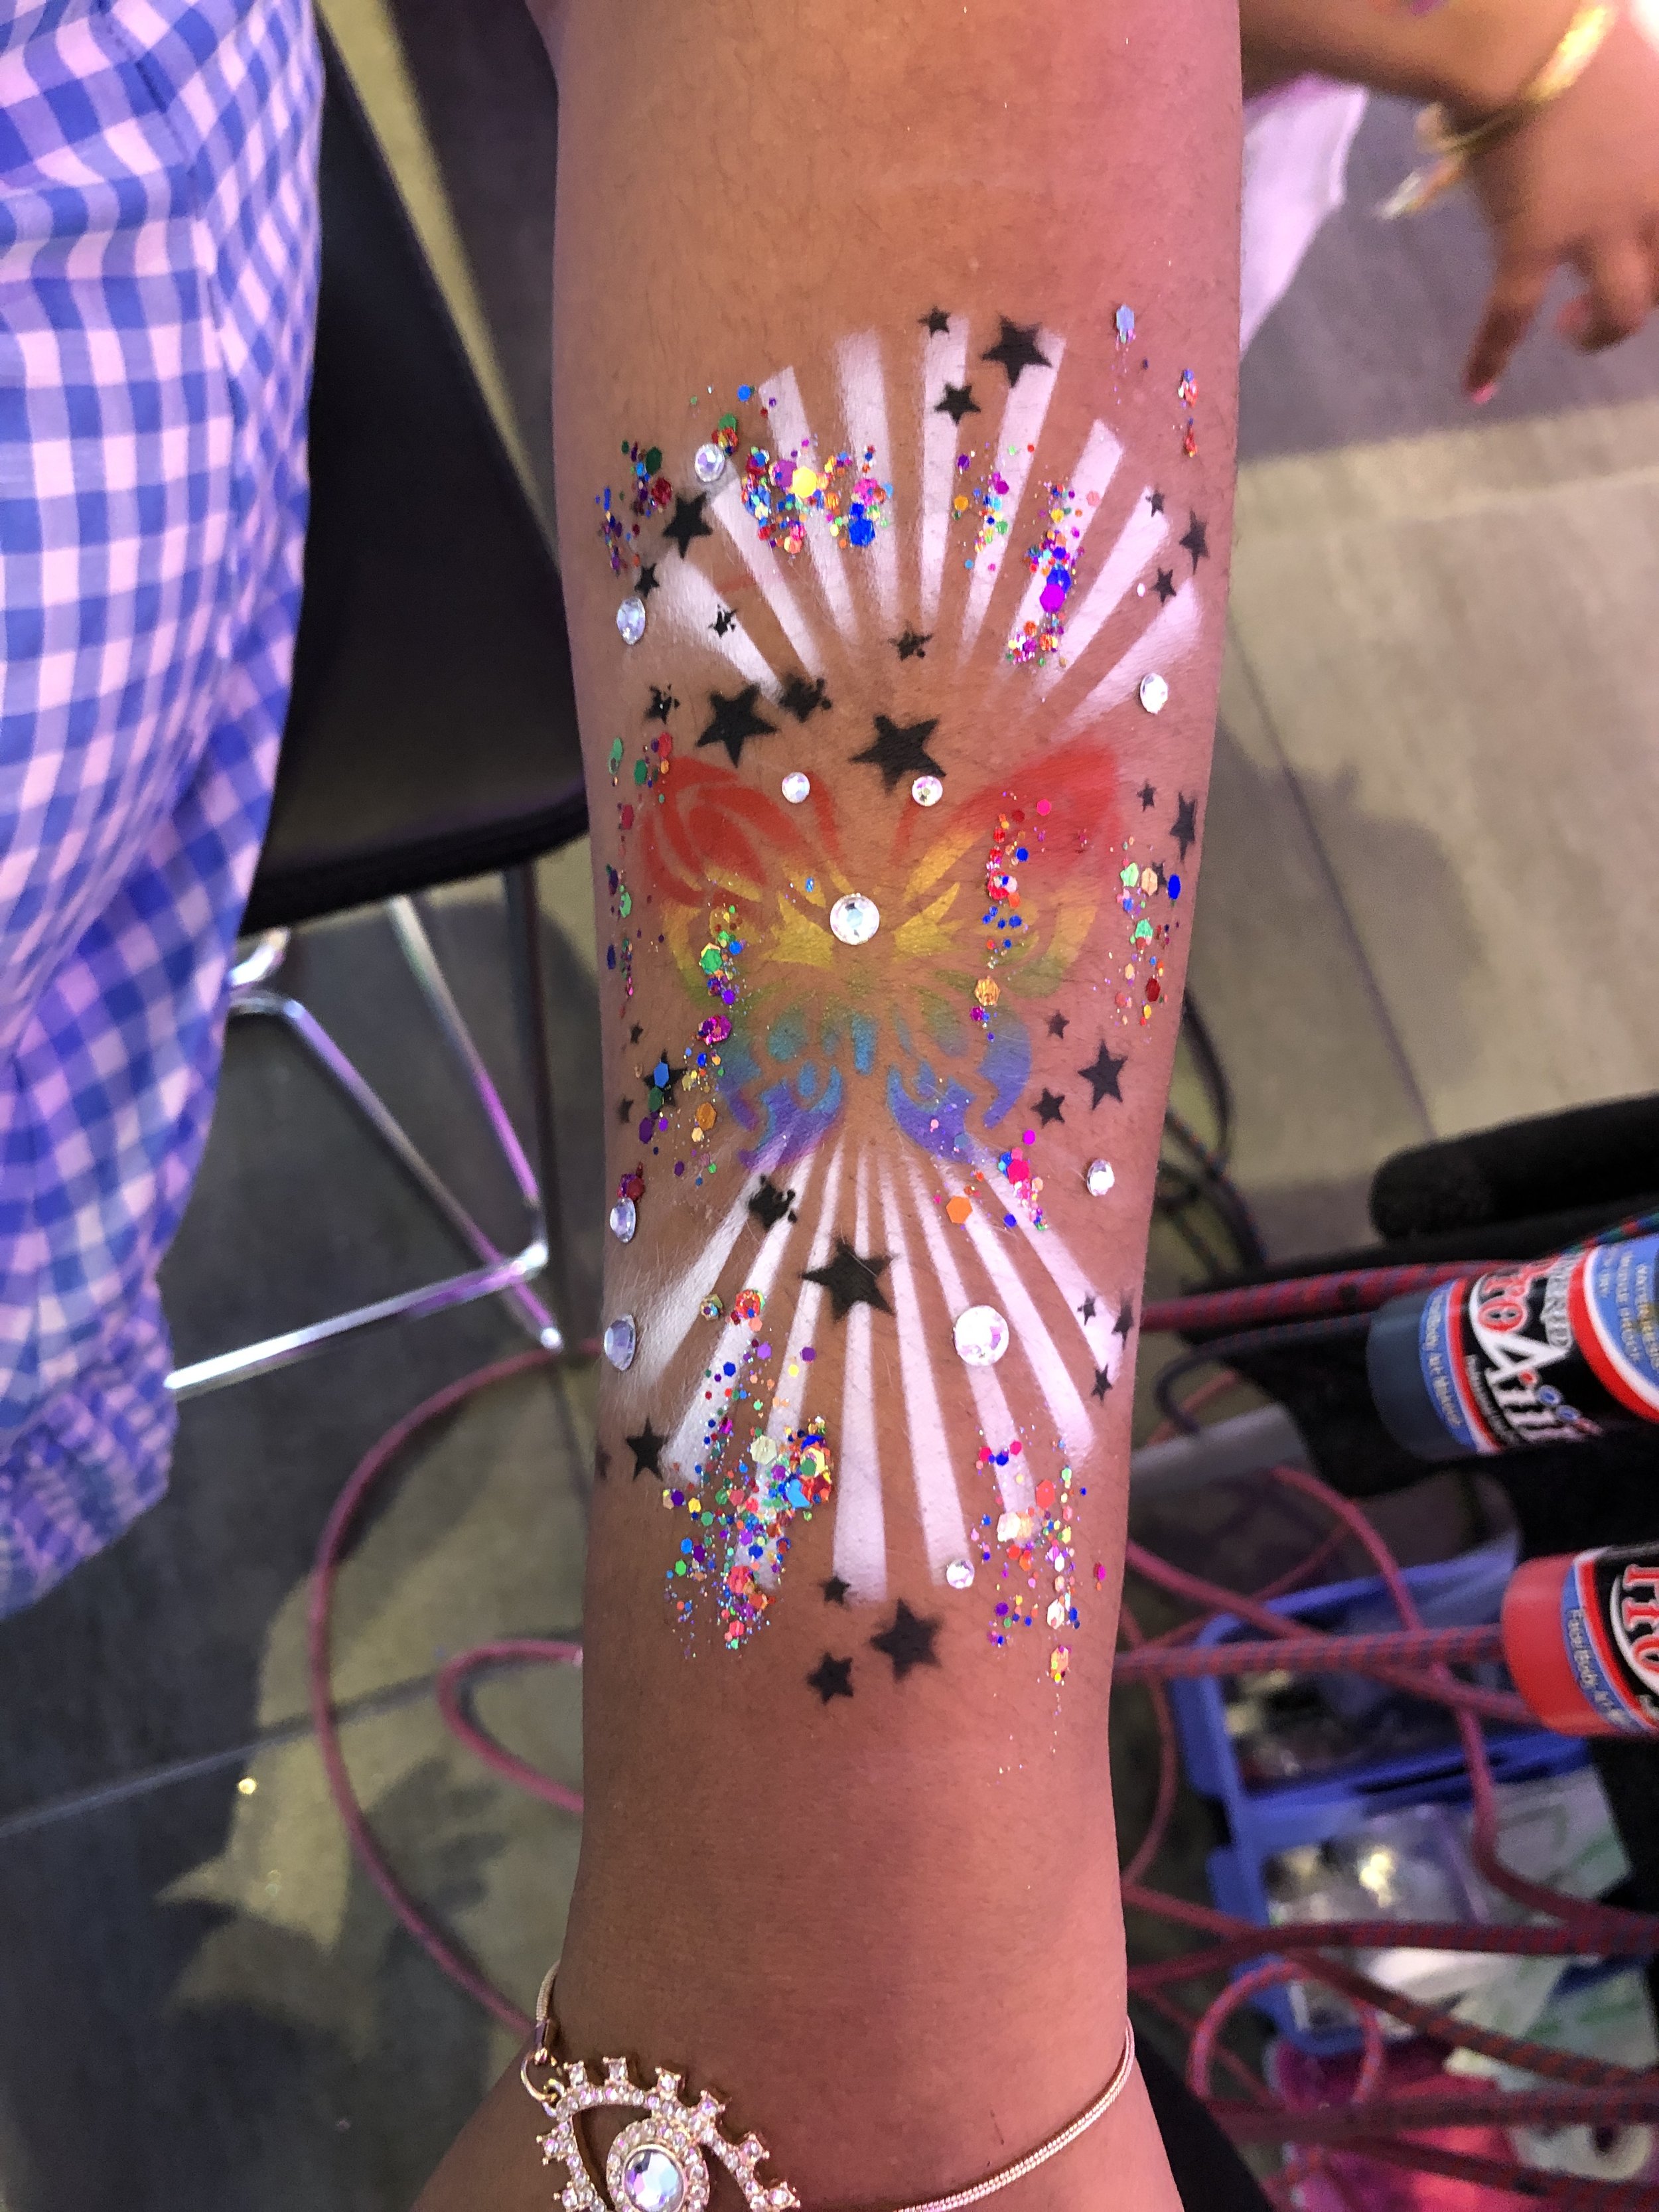 Airbrush Tattoos for Kids and Adults New York City.JPG